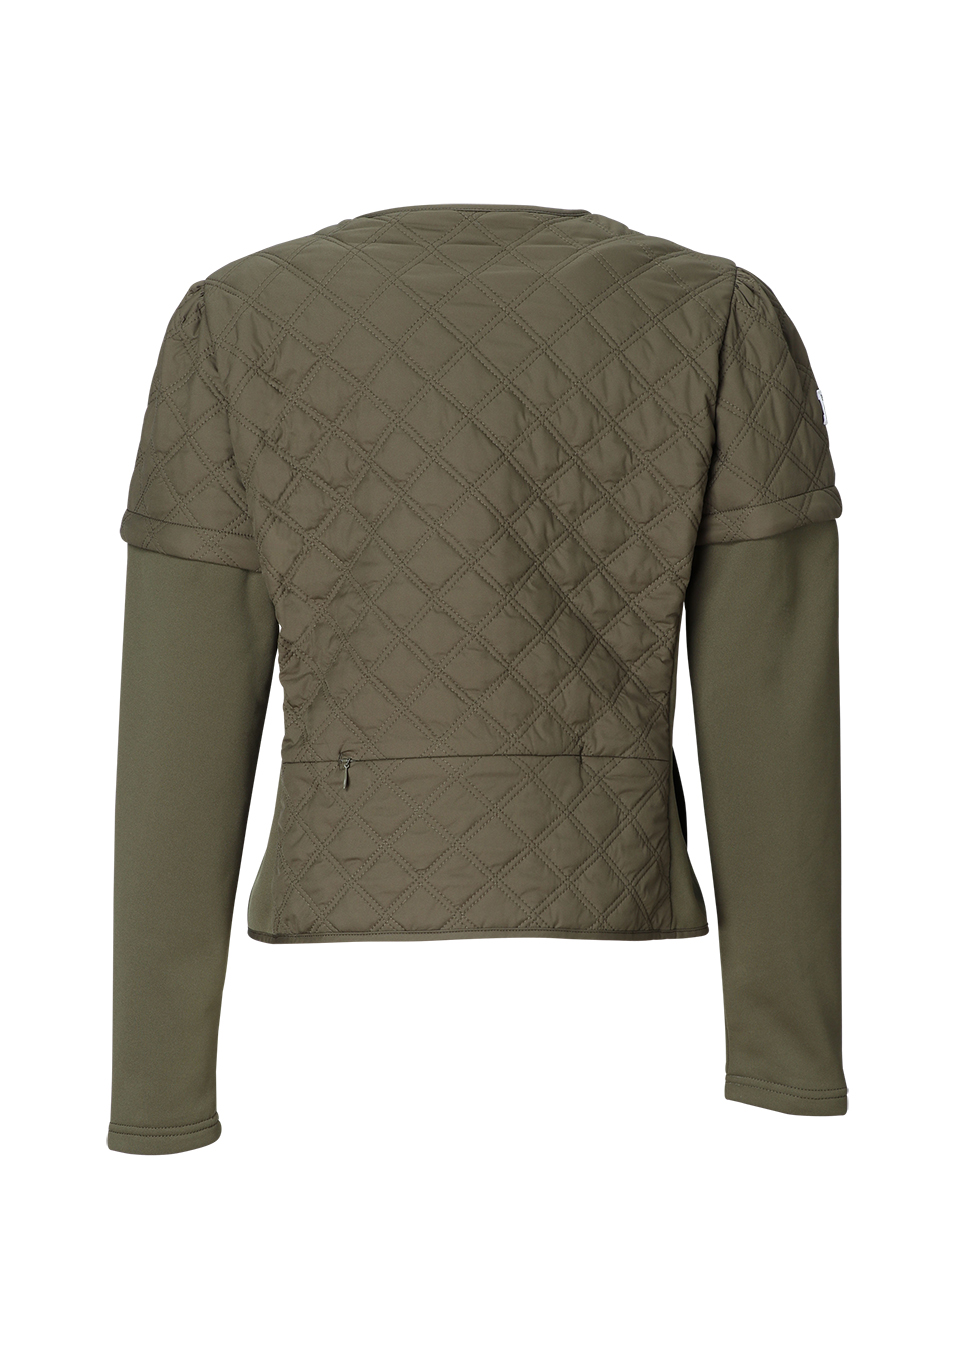 GDT QUILTED JACKET